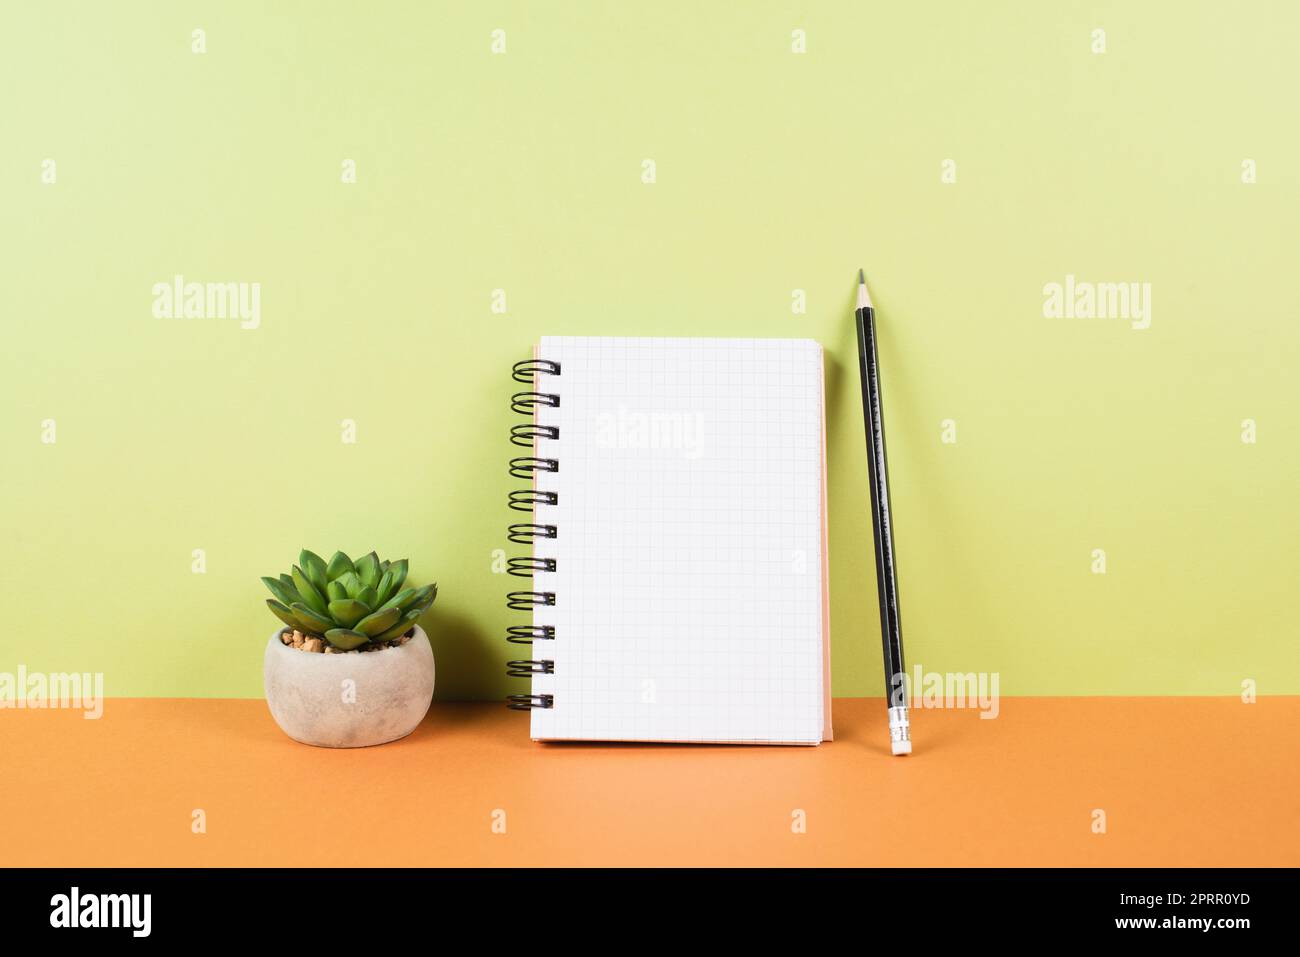 Blank notepad with a pencil on an orange and green background, pot with a cactus, copy space for text, office desk Stock Photo